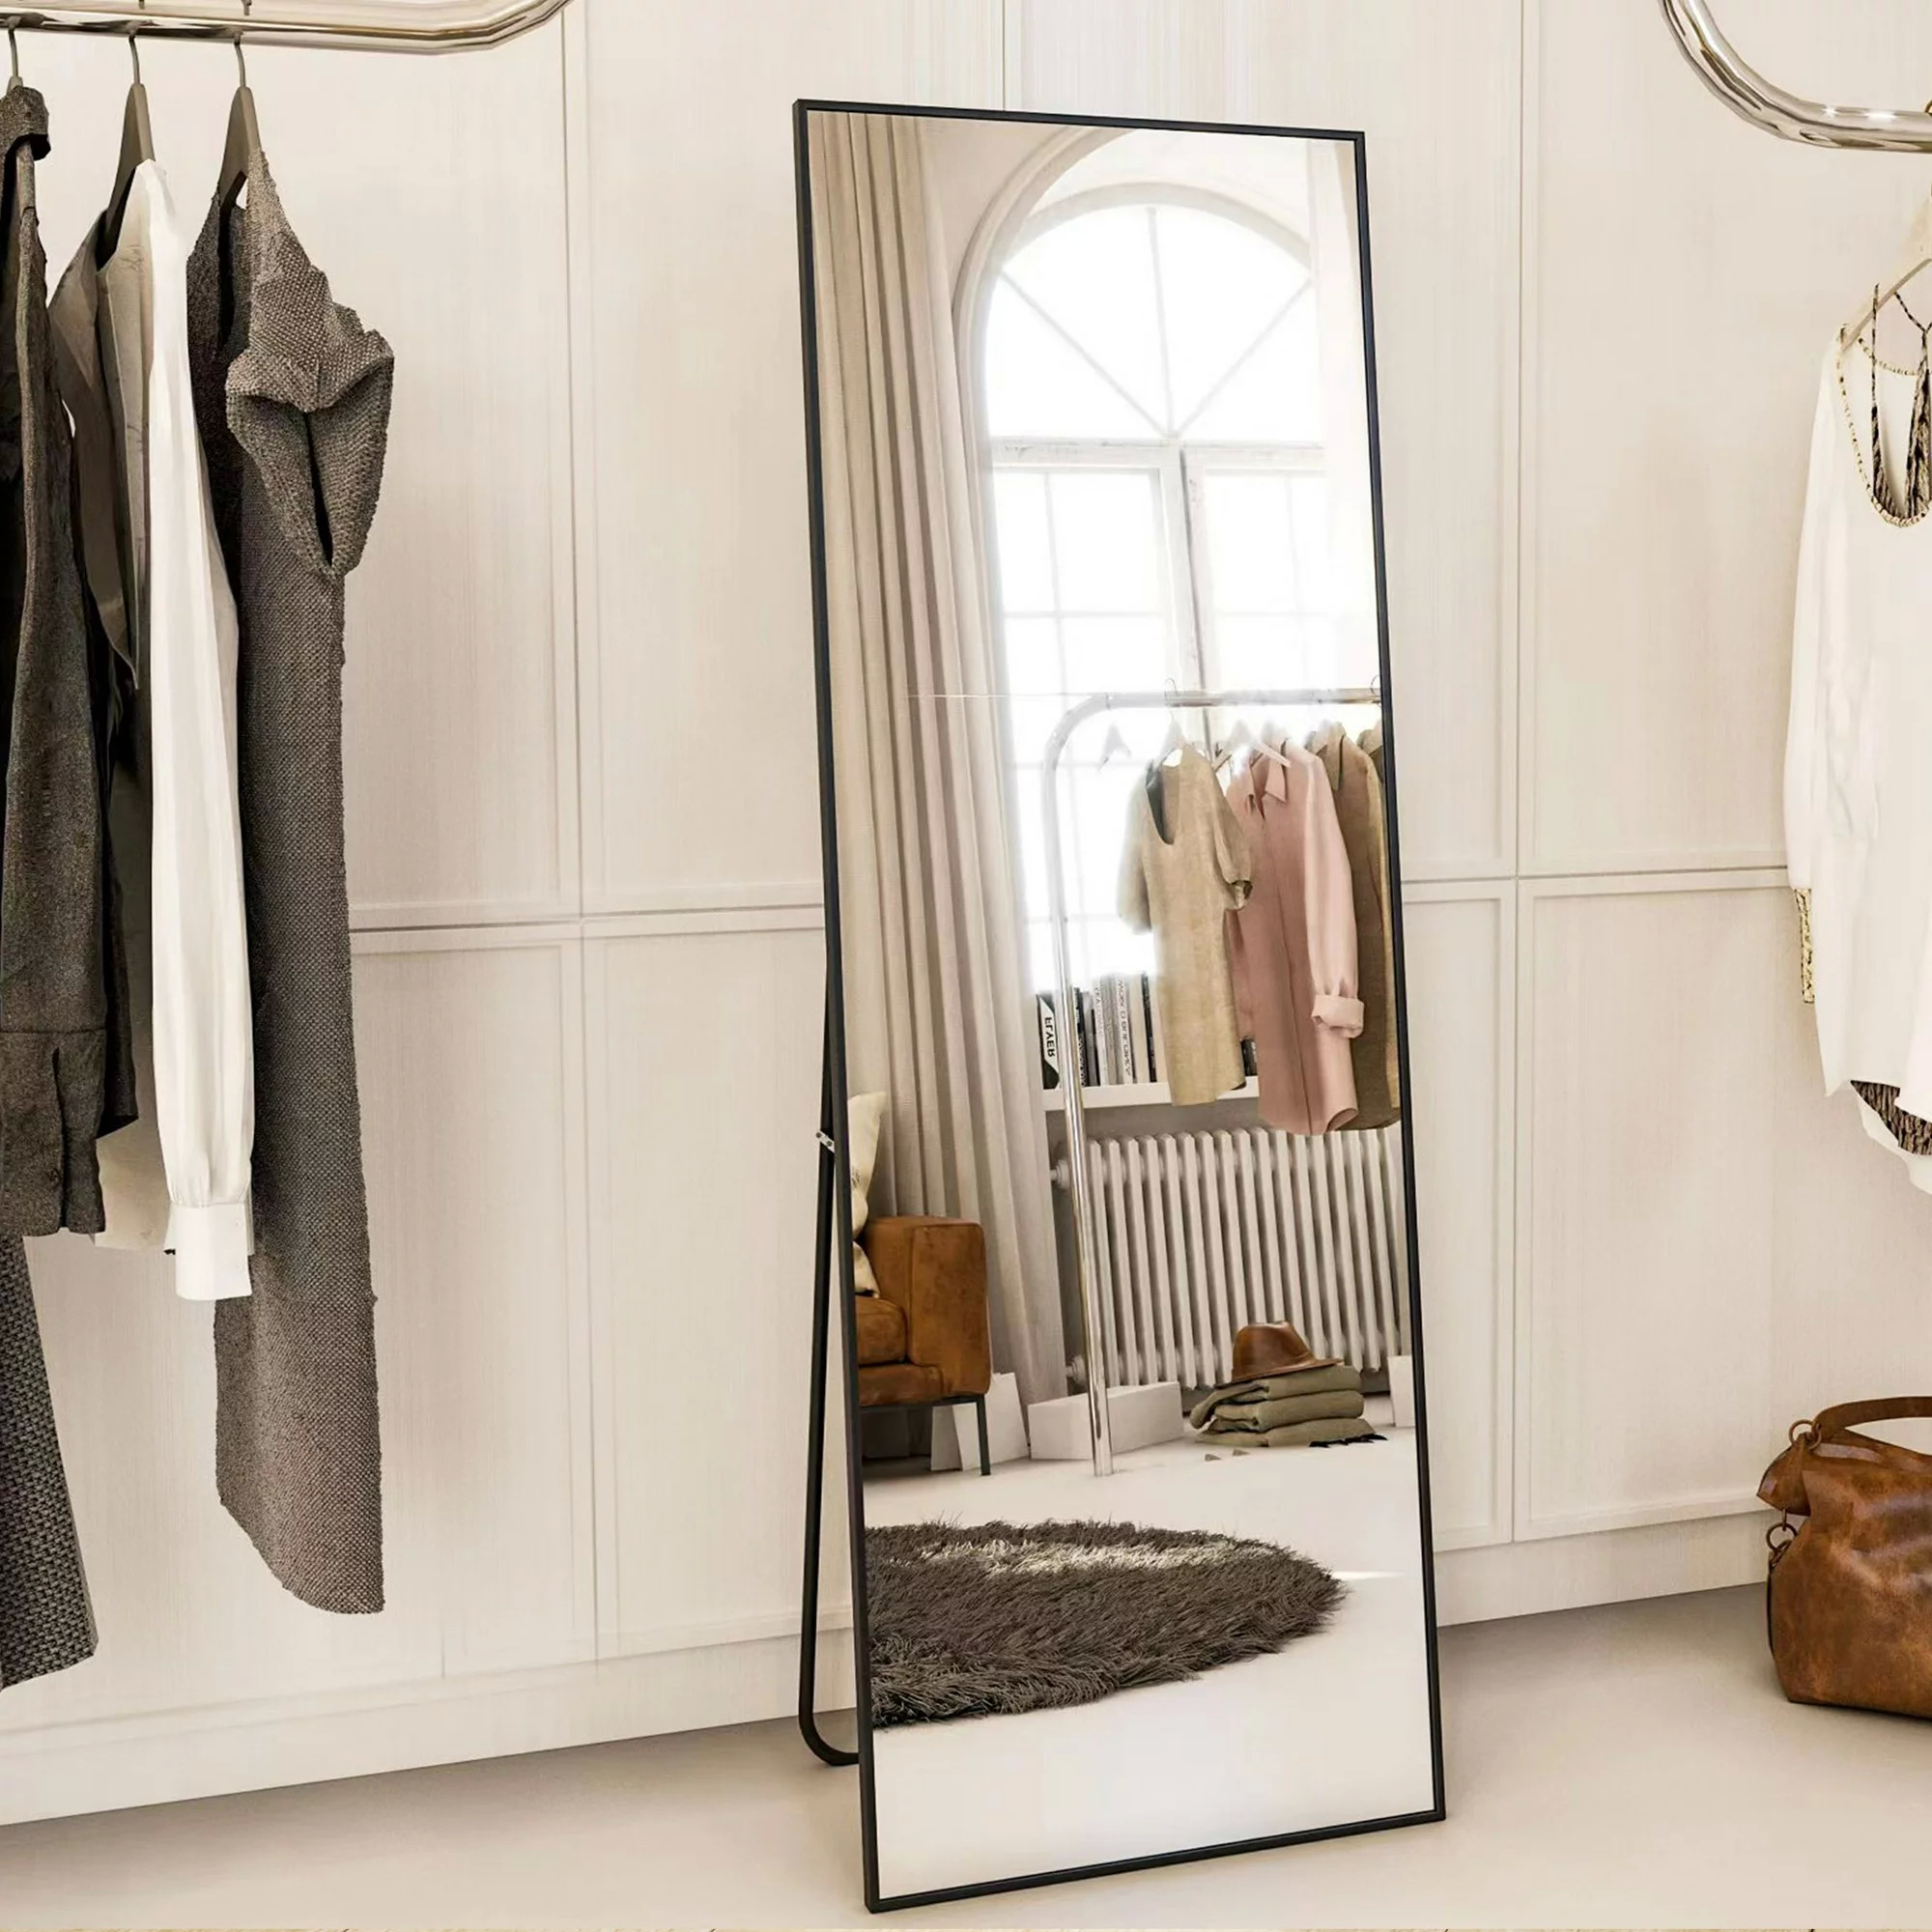 64" x 21" Beautypeak Full Length Rectangle Mirror w/ Stand (Black or Gold) $55 + Free Shipping